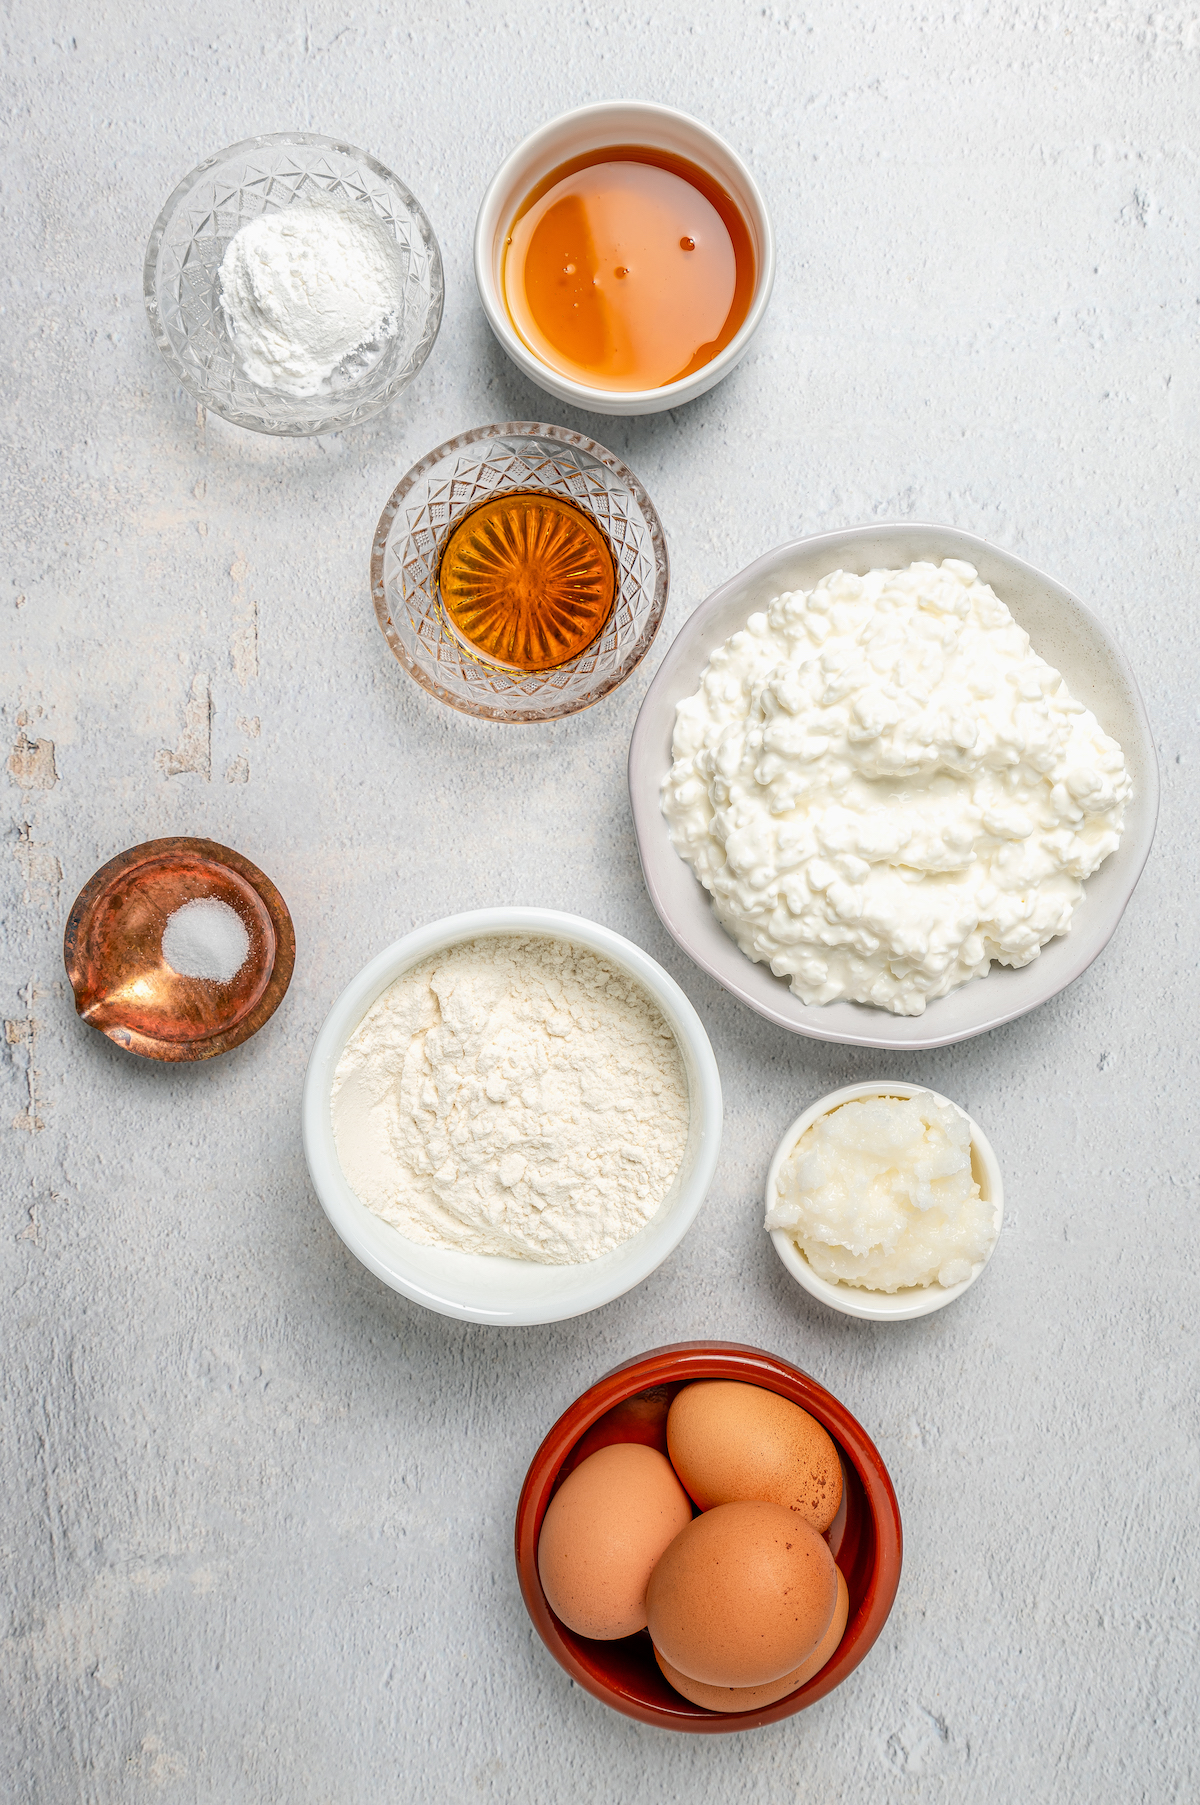 Cottage cheese, gluten free flour, and other baking ingredients arranged on a work surface.